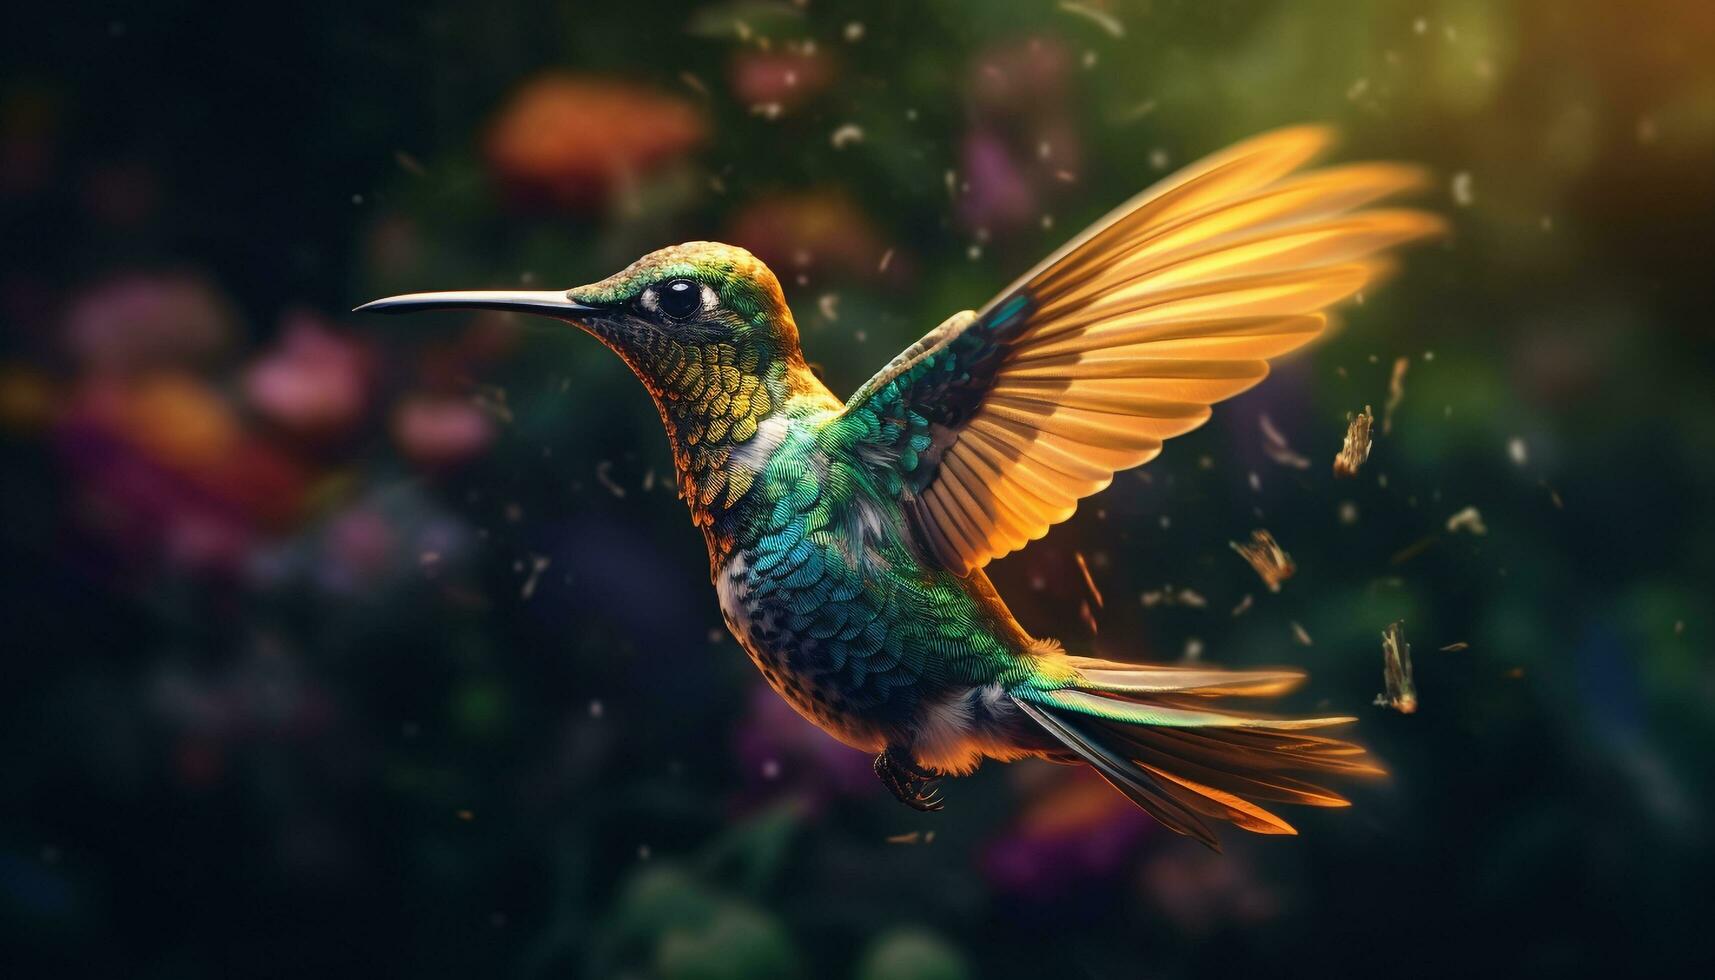 Hummingbird flying, vibrant colors, nature beauty, iridescent feathers, small bird generated by AI photo